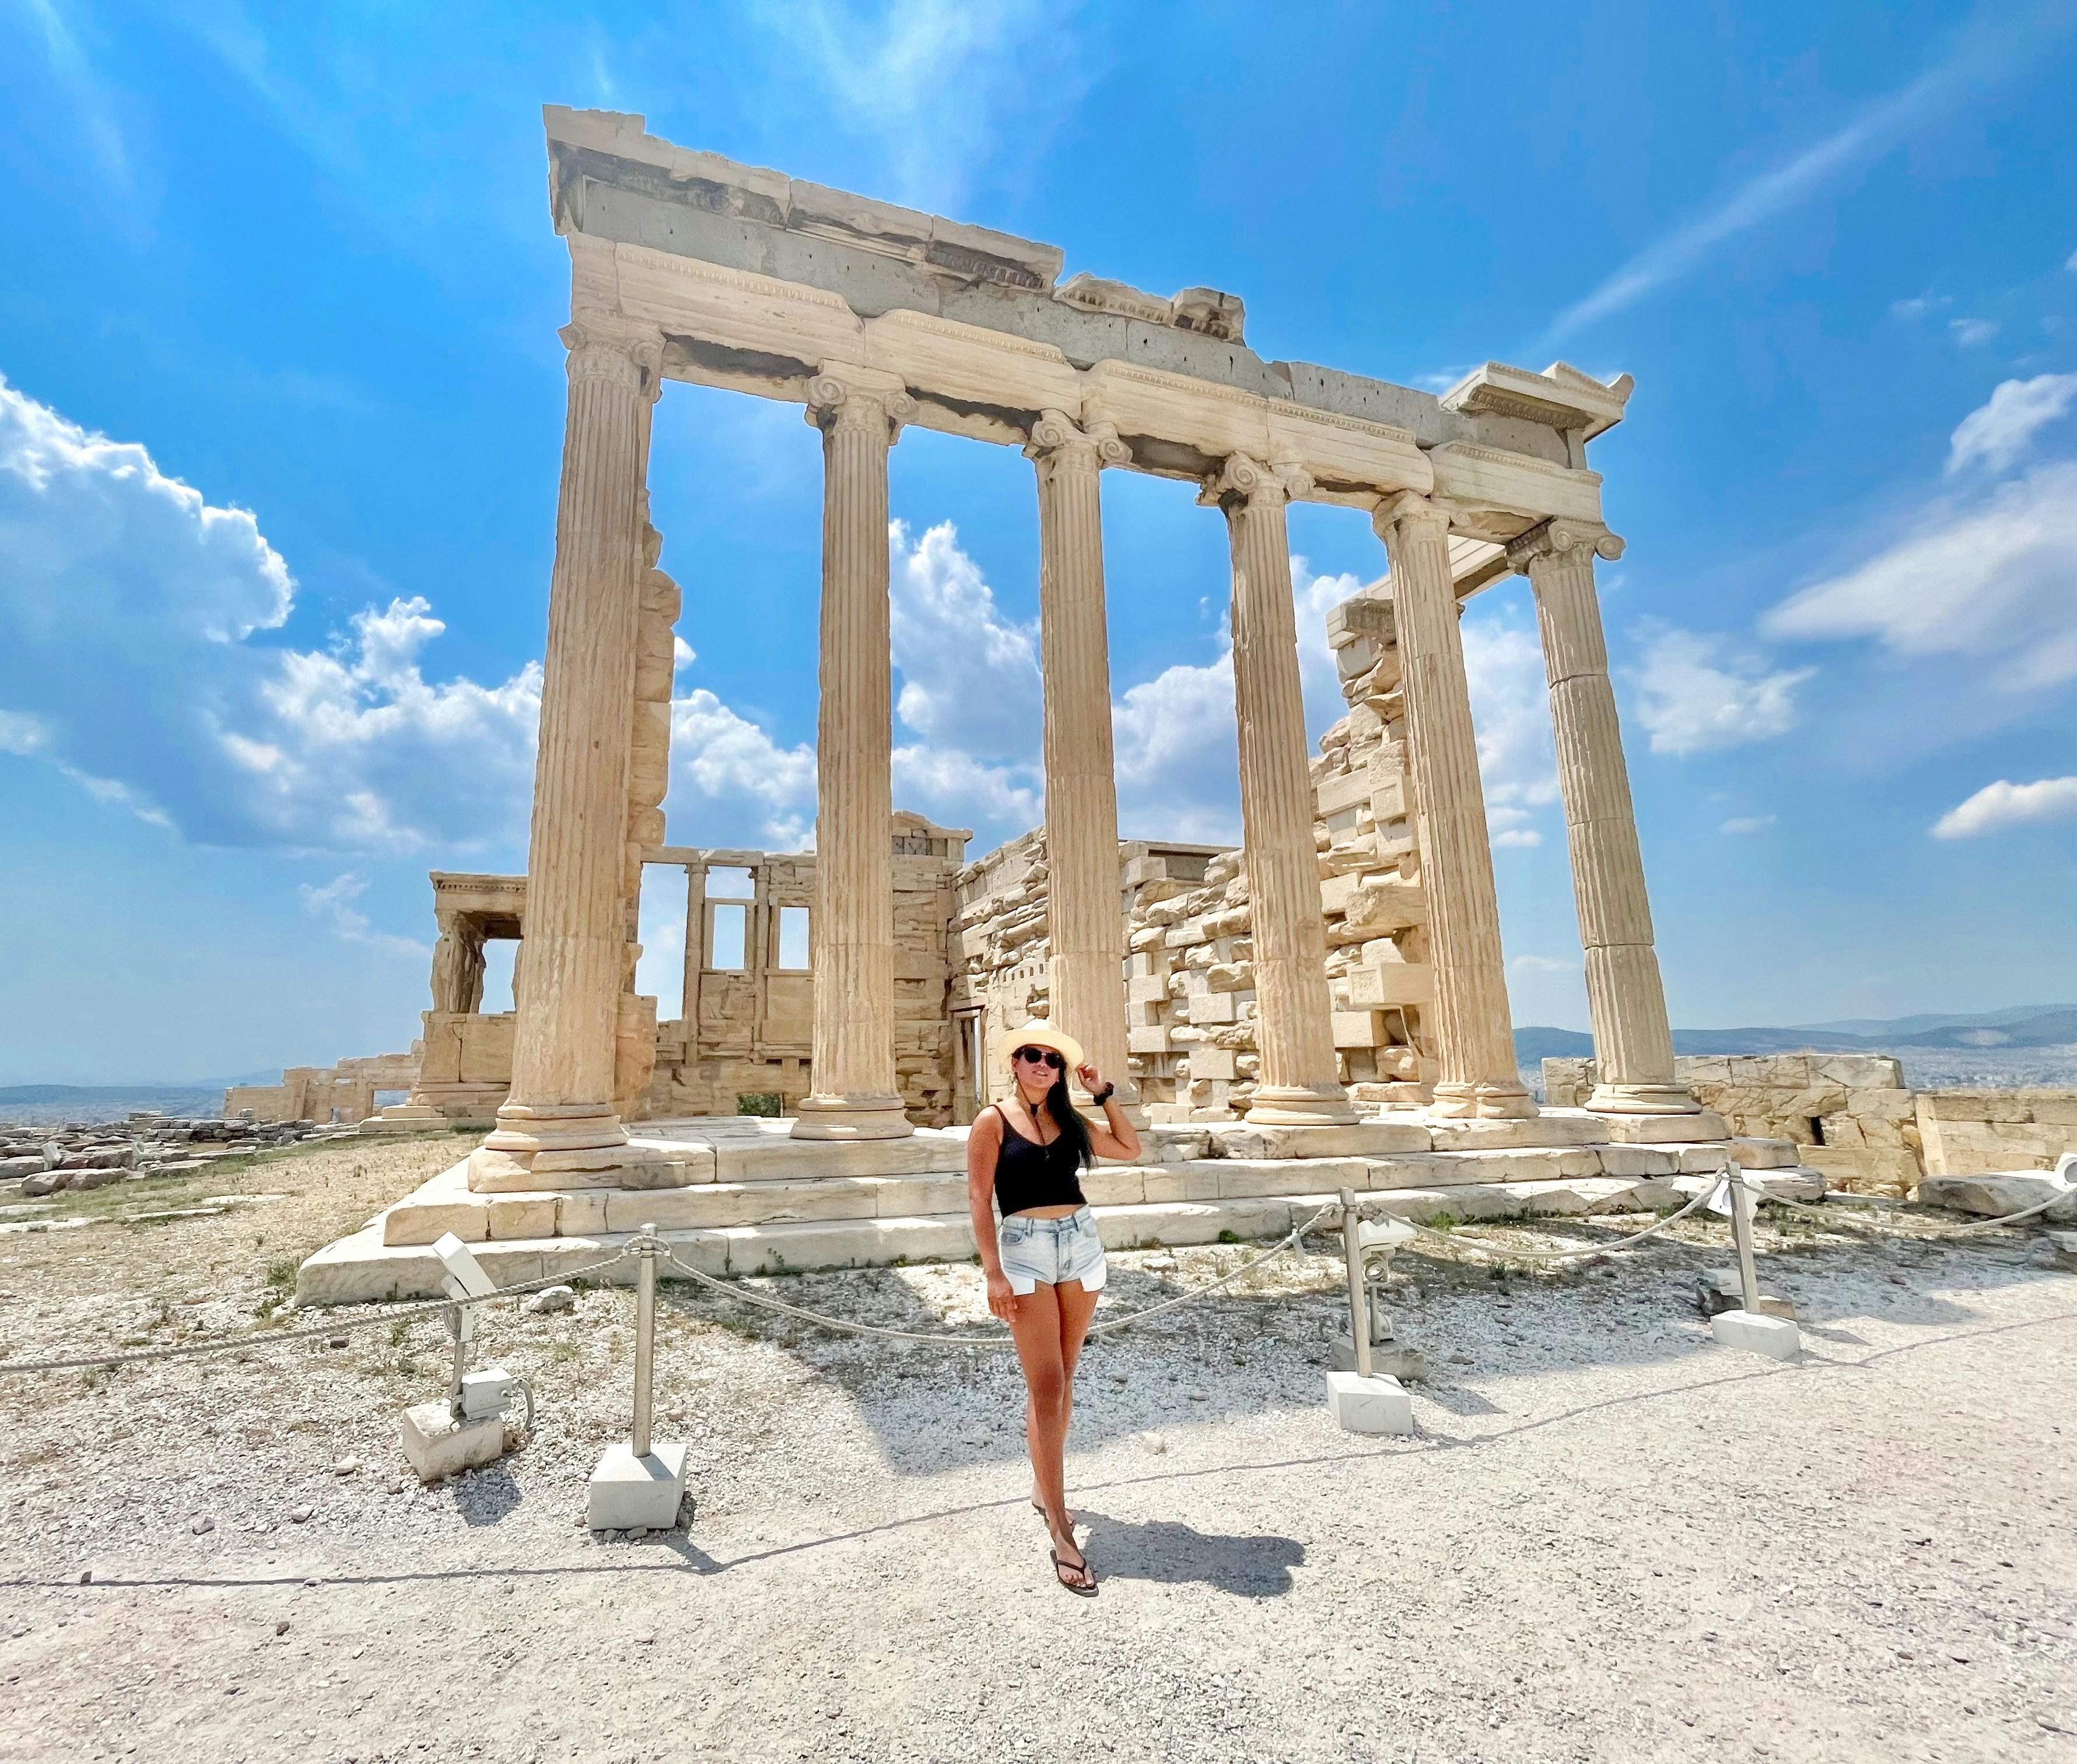 Made it to the Acropolis!